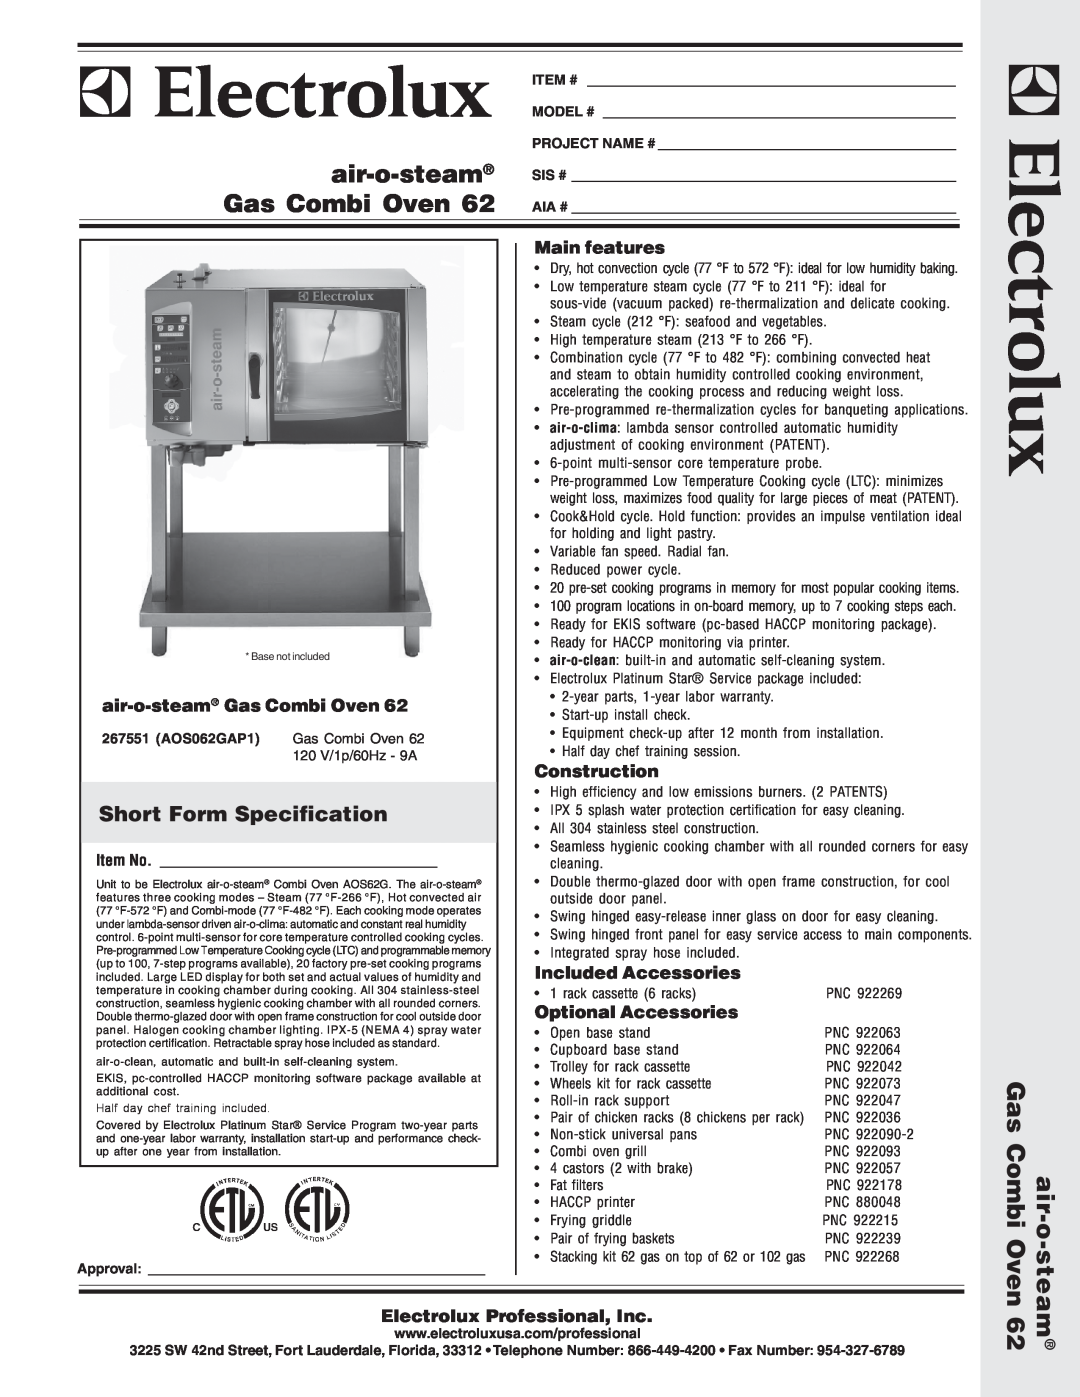 Electrolux AOS062GAP1 warranty Short Form Specification, air-o-steam Gas Combi Oven, Main features, Construction, Item # 